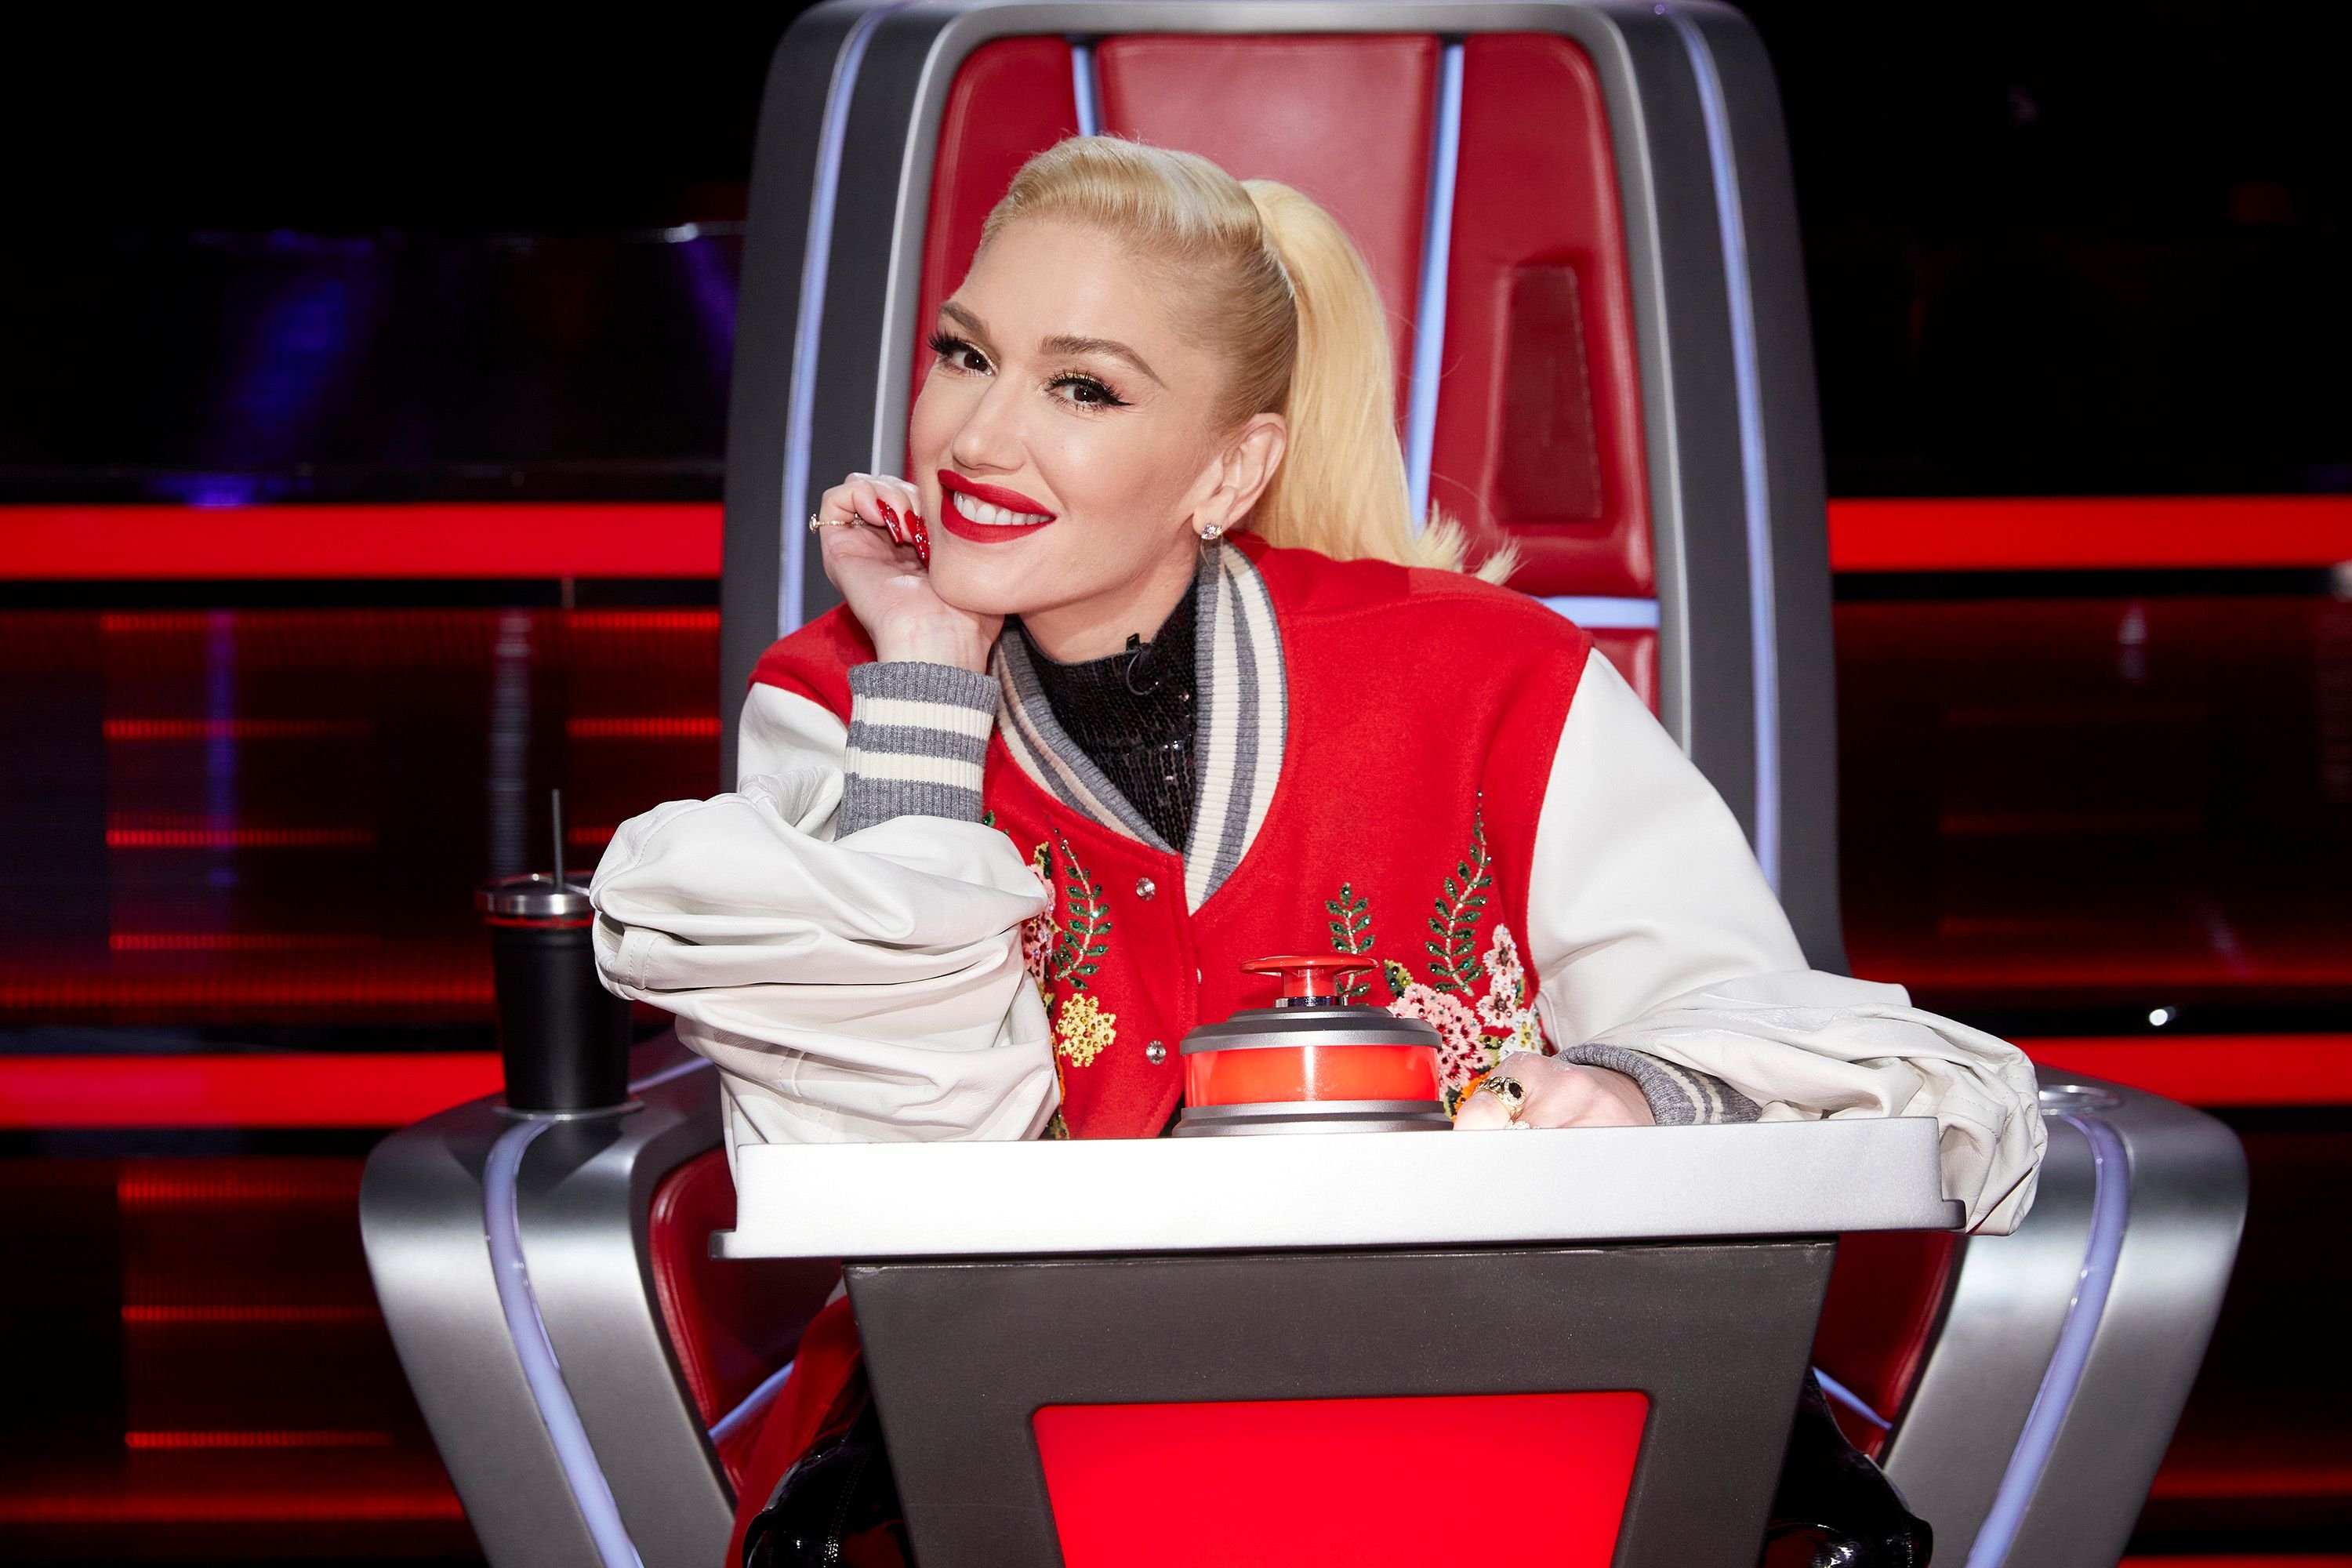 Gwen Stefani on set for Season 19 of "The Voice" | Source: Getty Images